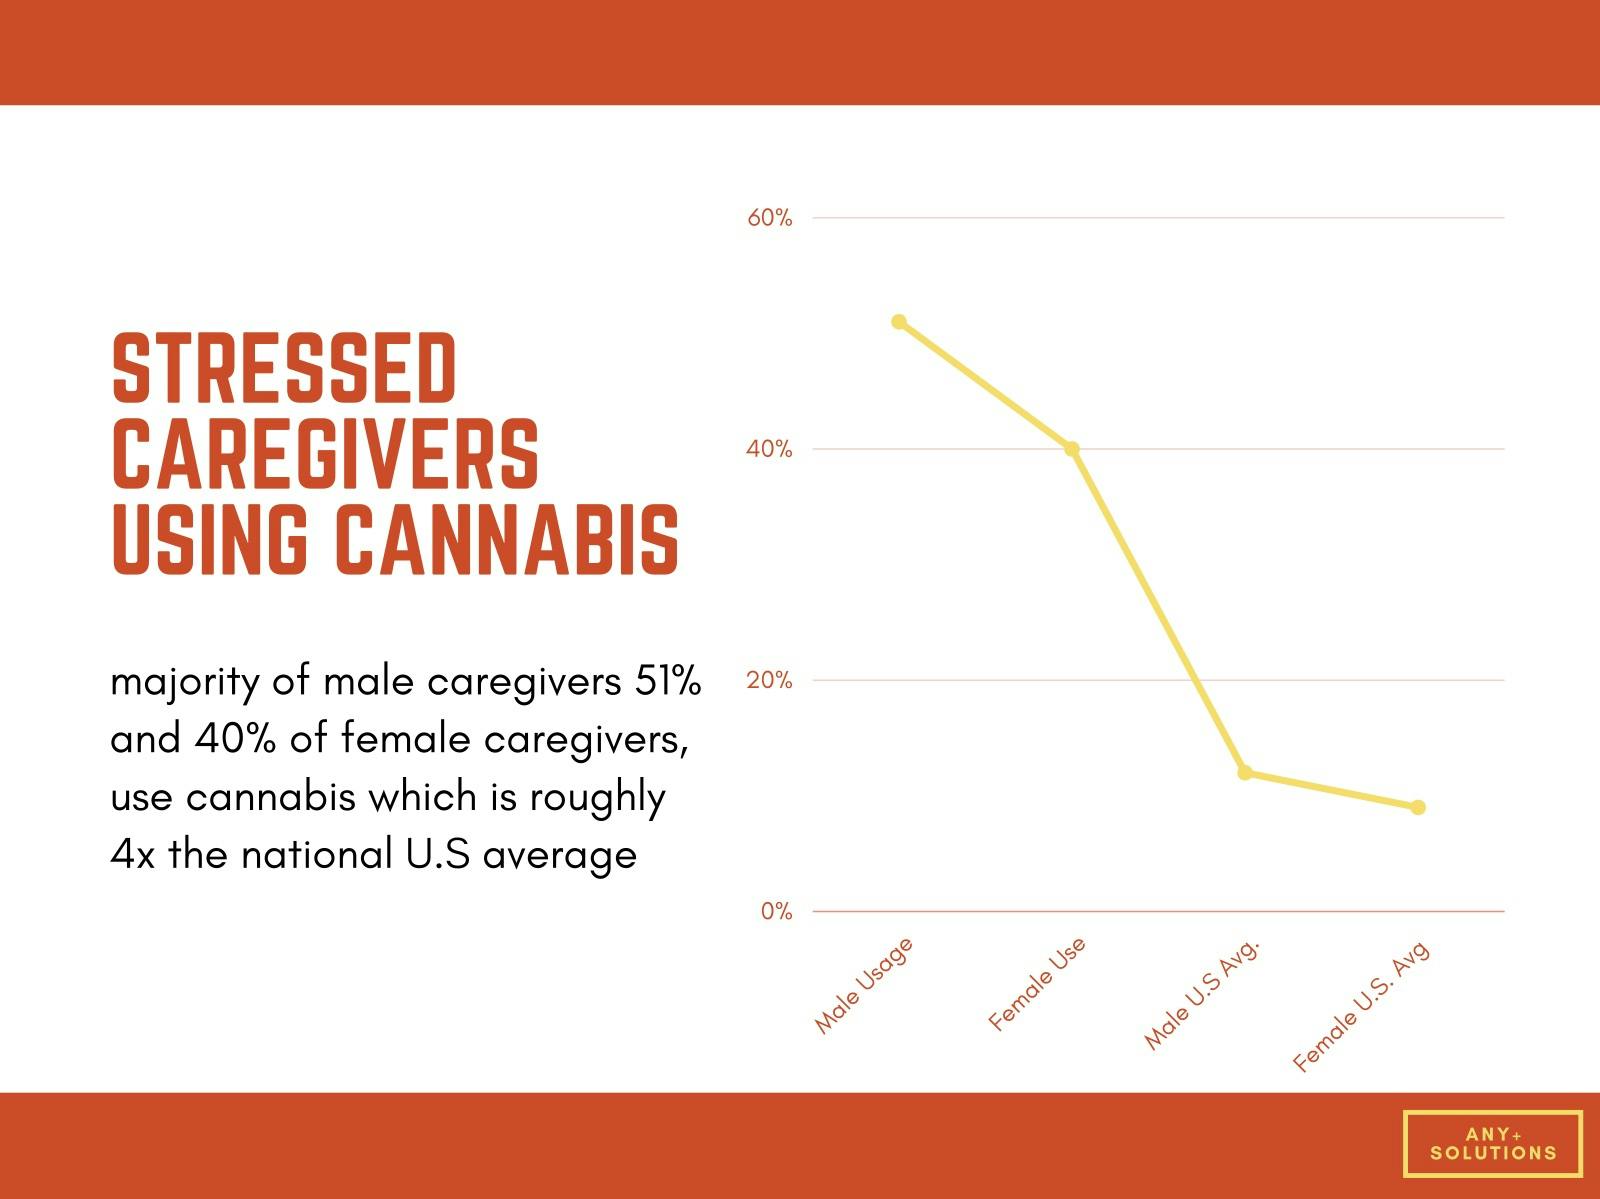 A line graph showing that a majority of male caregivers (51%) and 40% of female caregivers use cannabis, which is roughly 4x the national U.S. average. 